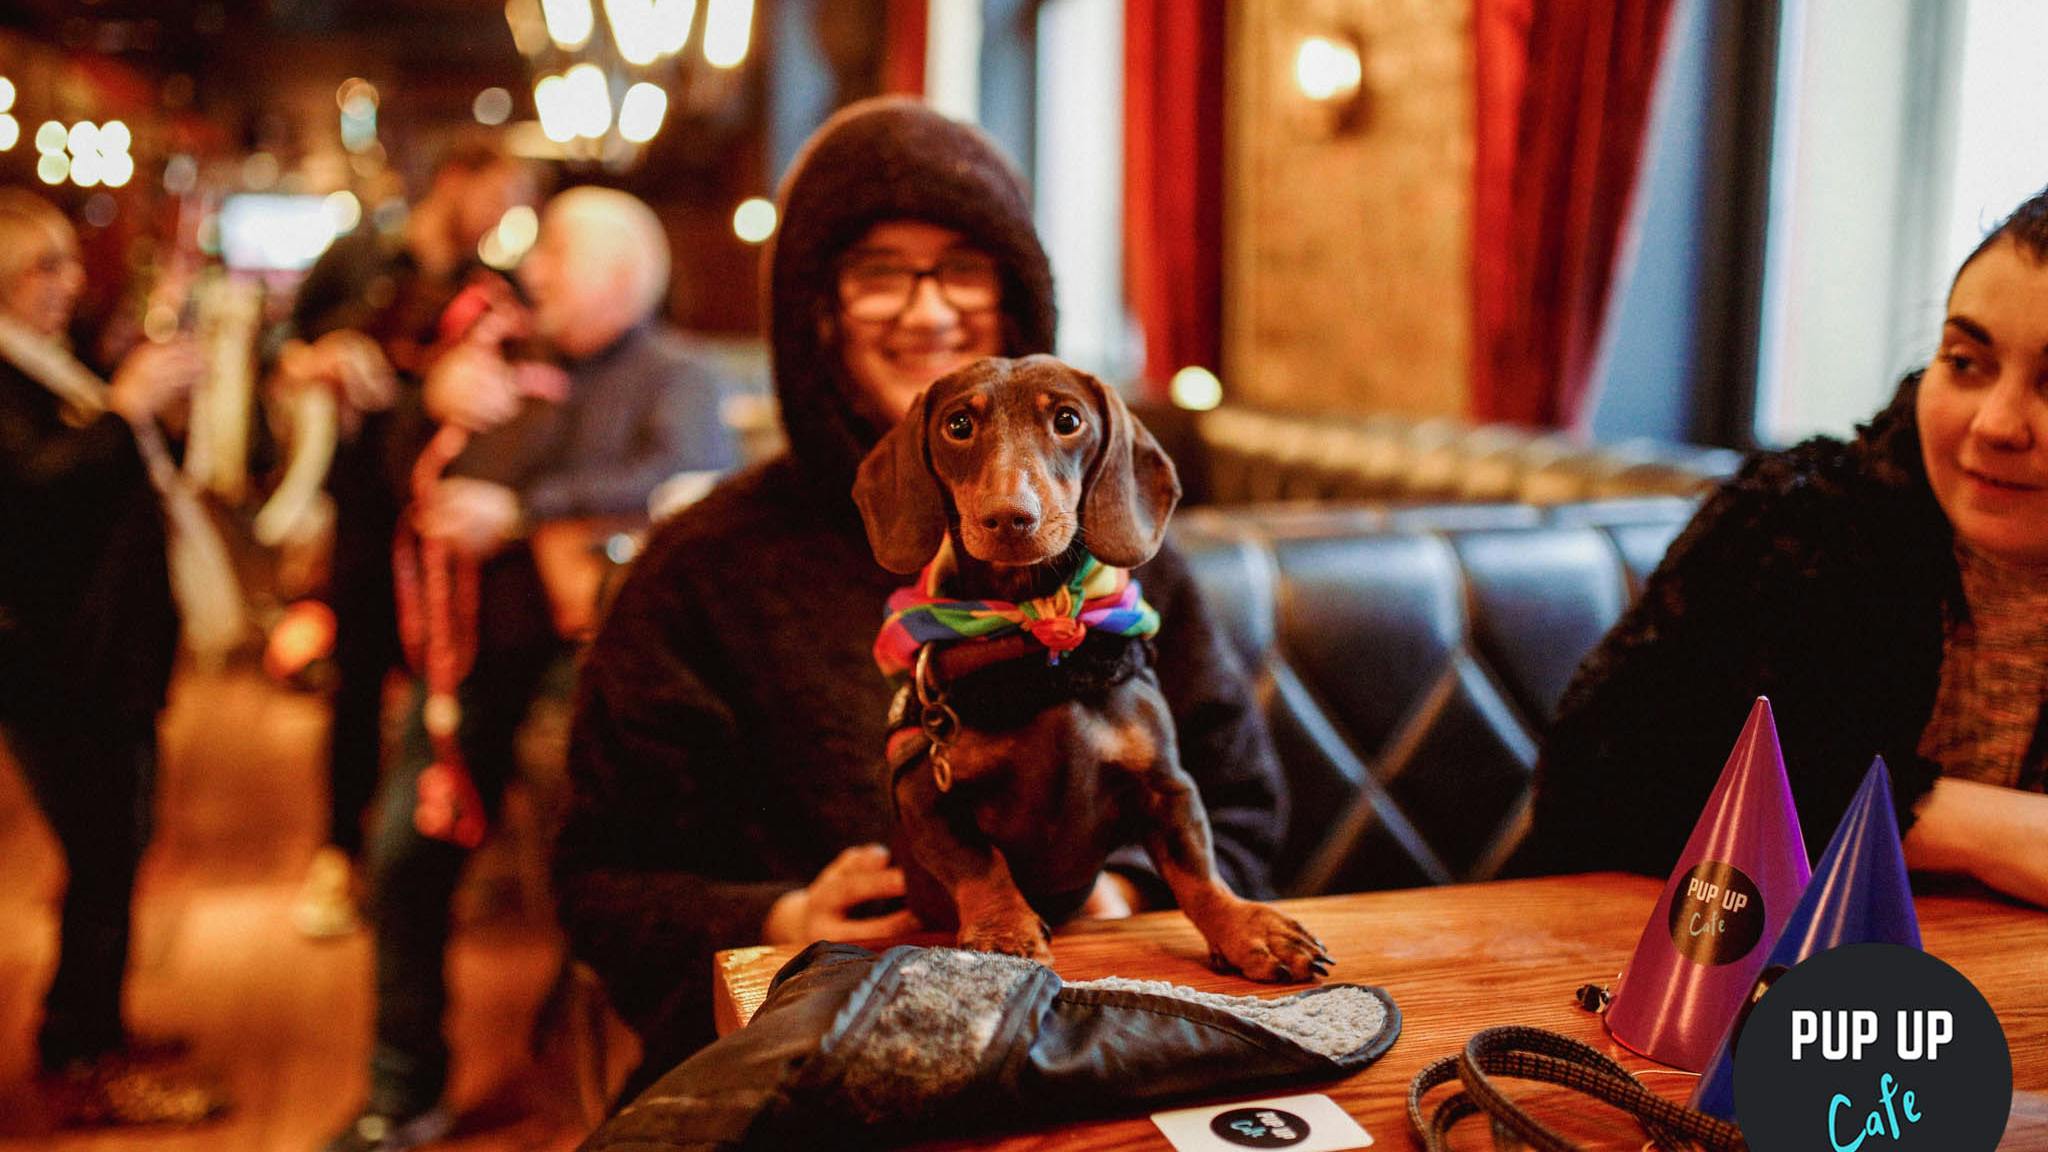 Much loved sausage dog cafe returning to Liverpool on Easter Sunday!